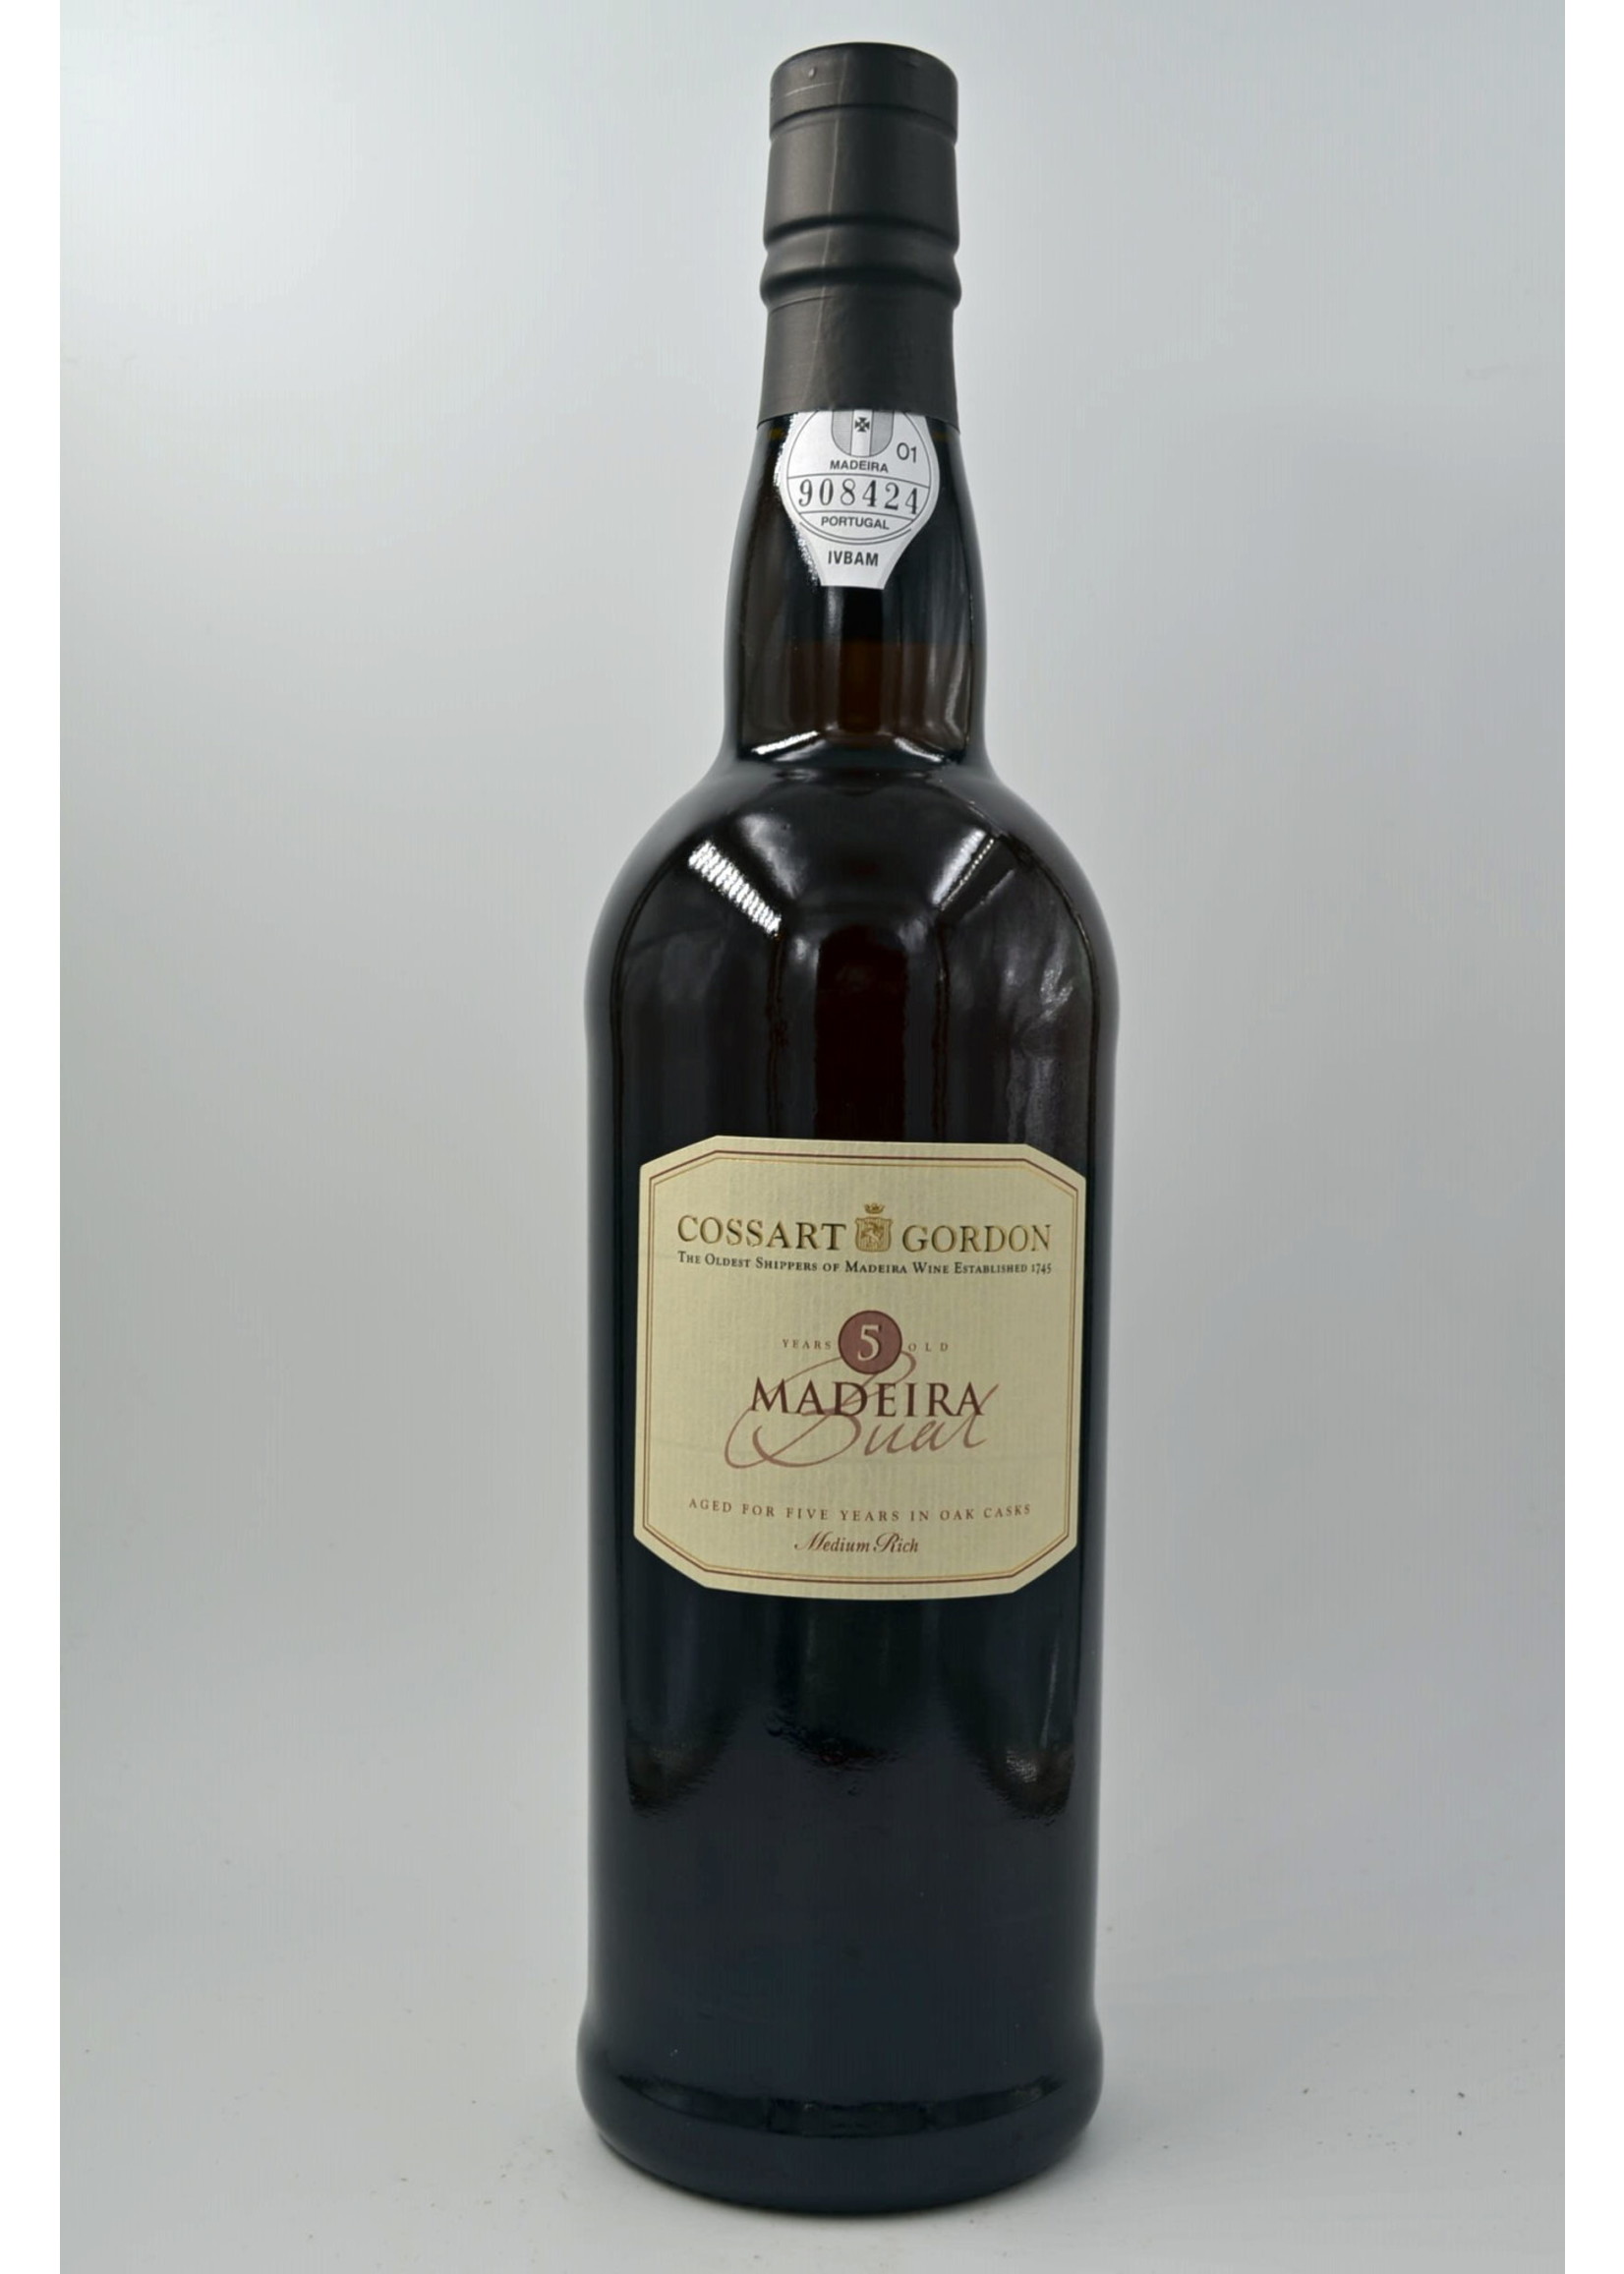 N/V Madeira 5 Years Old Bual Cossart